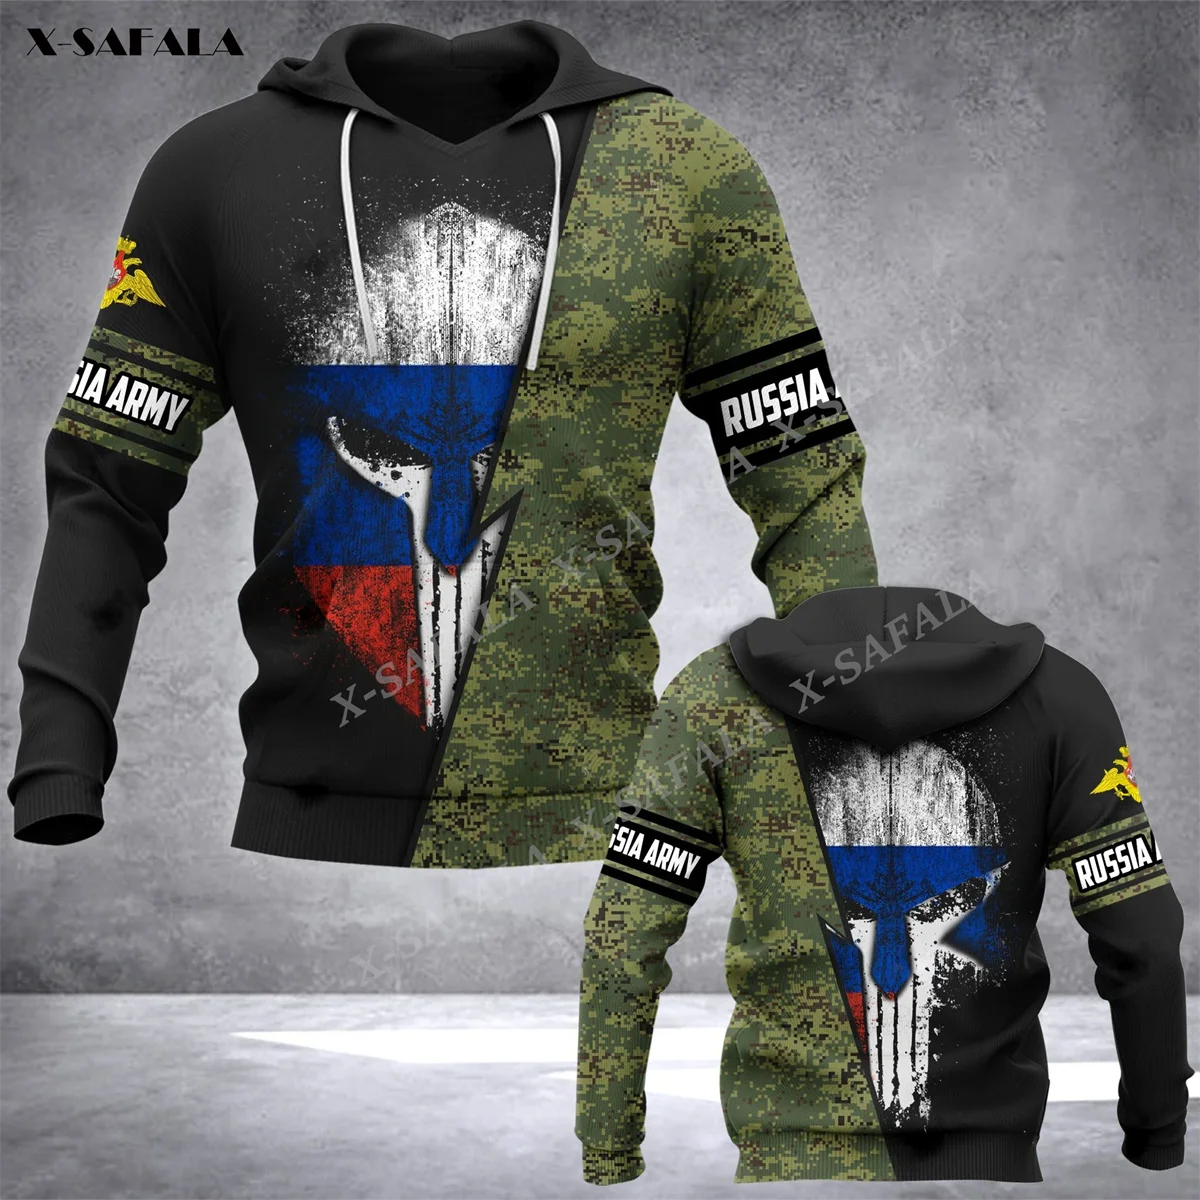 

Russia Flag Emble Armor Camo Army MASK 3D Print Zipper Hoodie Men Pullover Sweatshirt Hooded Jersey Tracksuits Outwear Coat